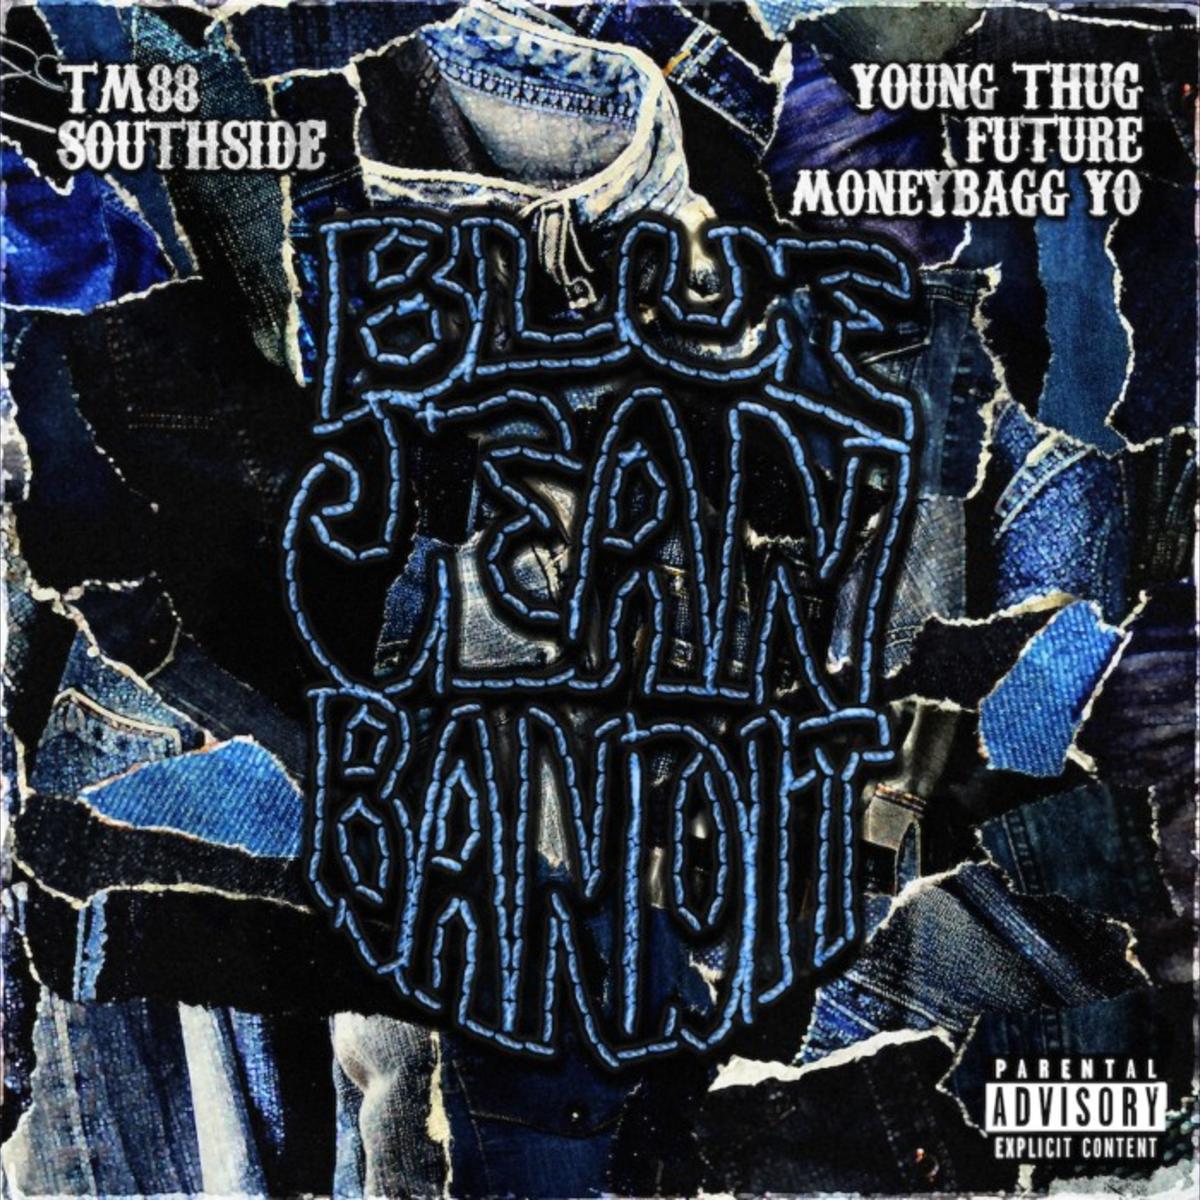 TM88, MoneyBagg Yo, Southside, Future & Young Thug Join Forces For “Blue Jean Bandit”